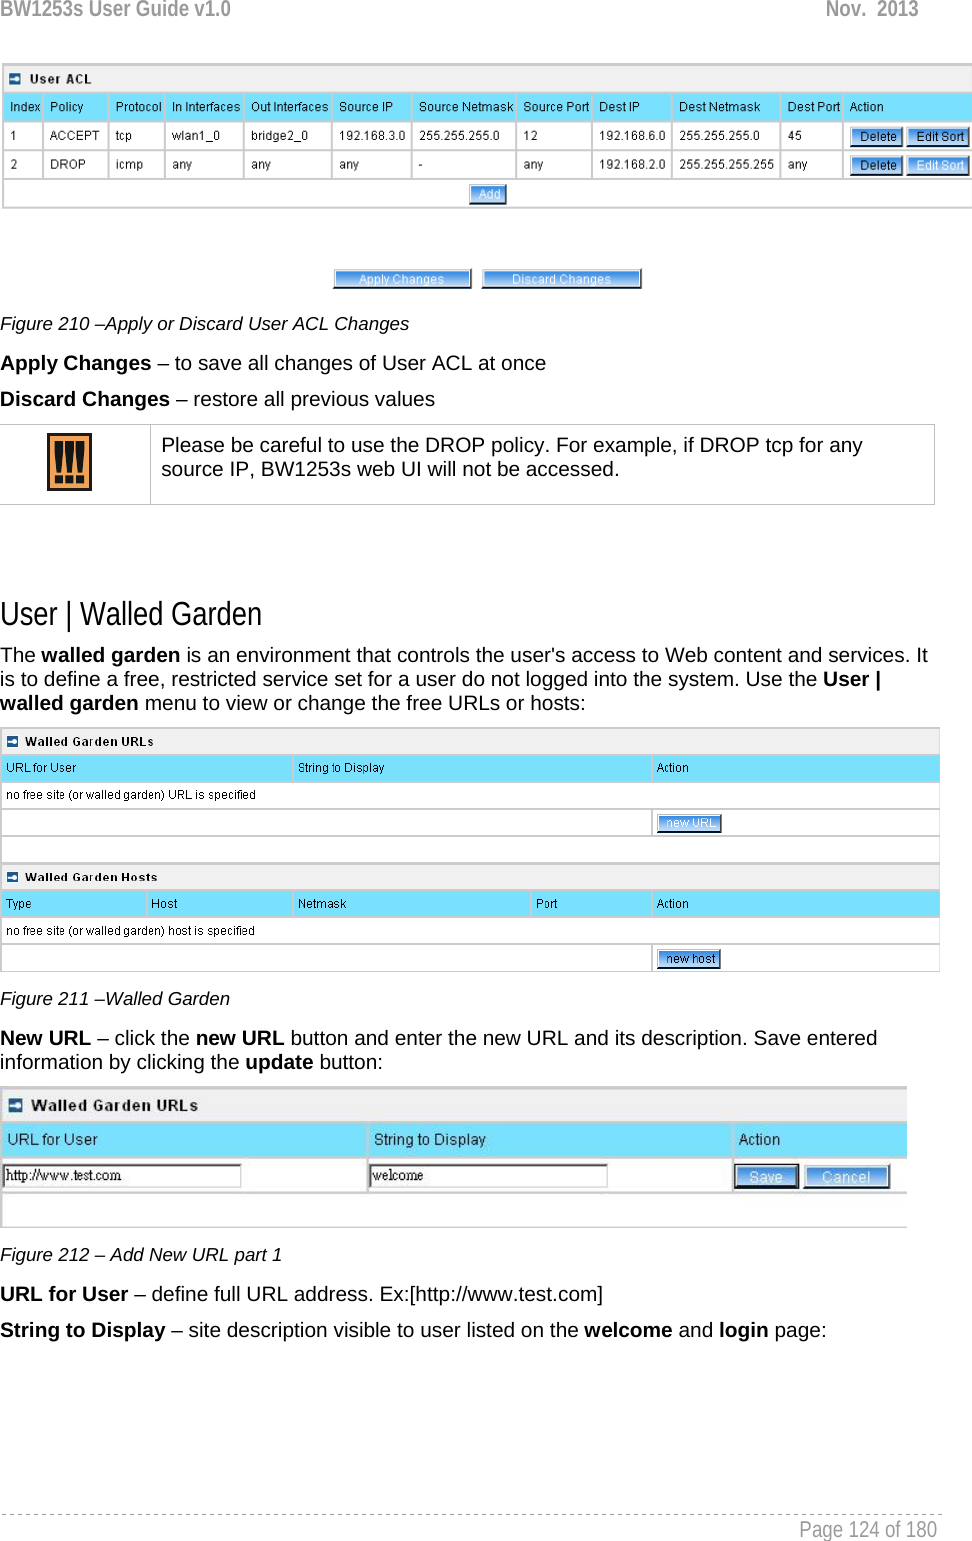 BW1253s User Guide v1.0  Nov.  2013     Page 124 of 180    Figure 210 –Apply or Discard User ACL Changes Apply Changes – to save all changes of User ACL at once Discard Changes – restore all previous values  Please be careful to use the DROP policy. For example, if DROP tcp for any source IP, BW1253s web UI will not be accessed.   User | Walled Garden The walled garden is an environment that controls the user&apos;s access to Web content and services. It is to define a free, restricted service set for a user do not logged into the system. Use the User | walled garden menu to view or change the free URLs or hosts:  Figure 211 –Walled Garden New URL – click the new URL button and enter the new URL and its description. Save entered information by clicking the update button:  Figure 212 – Add New URL part 1 URL for User – define full URL address. Ex:[http://www.test.com] String to Display – site description visible to user listed on the welcome and login page: 